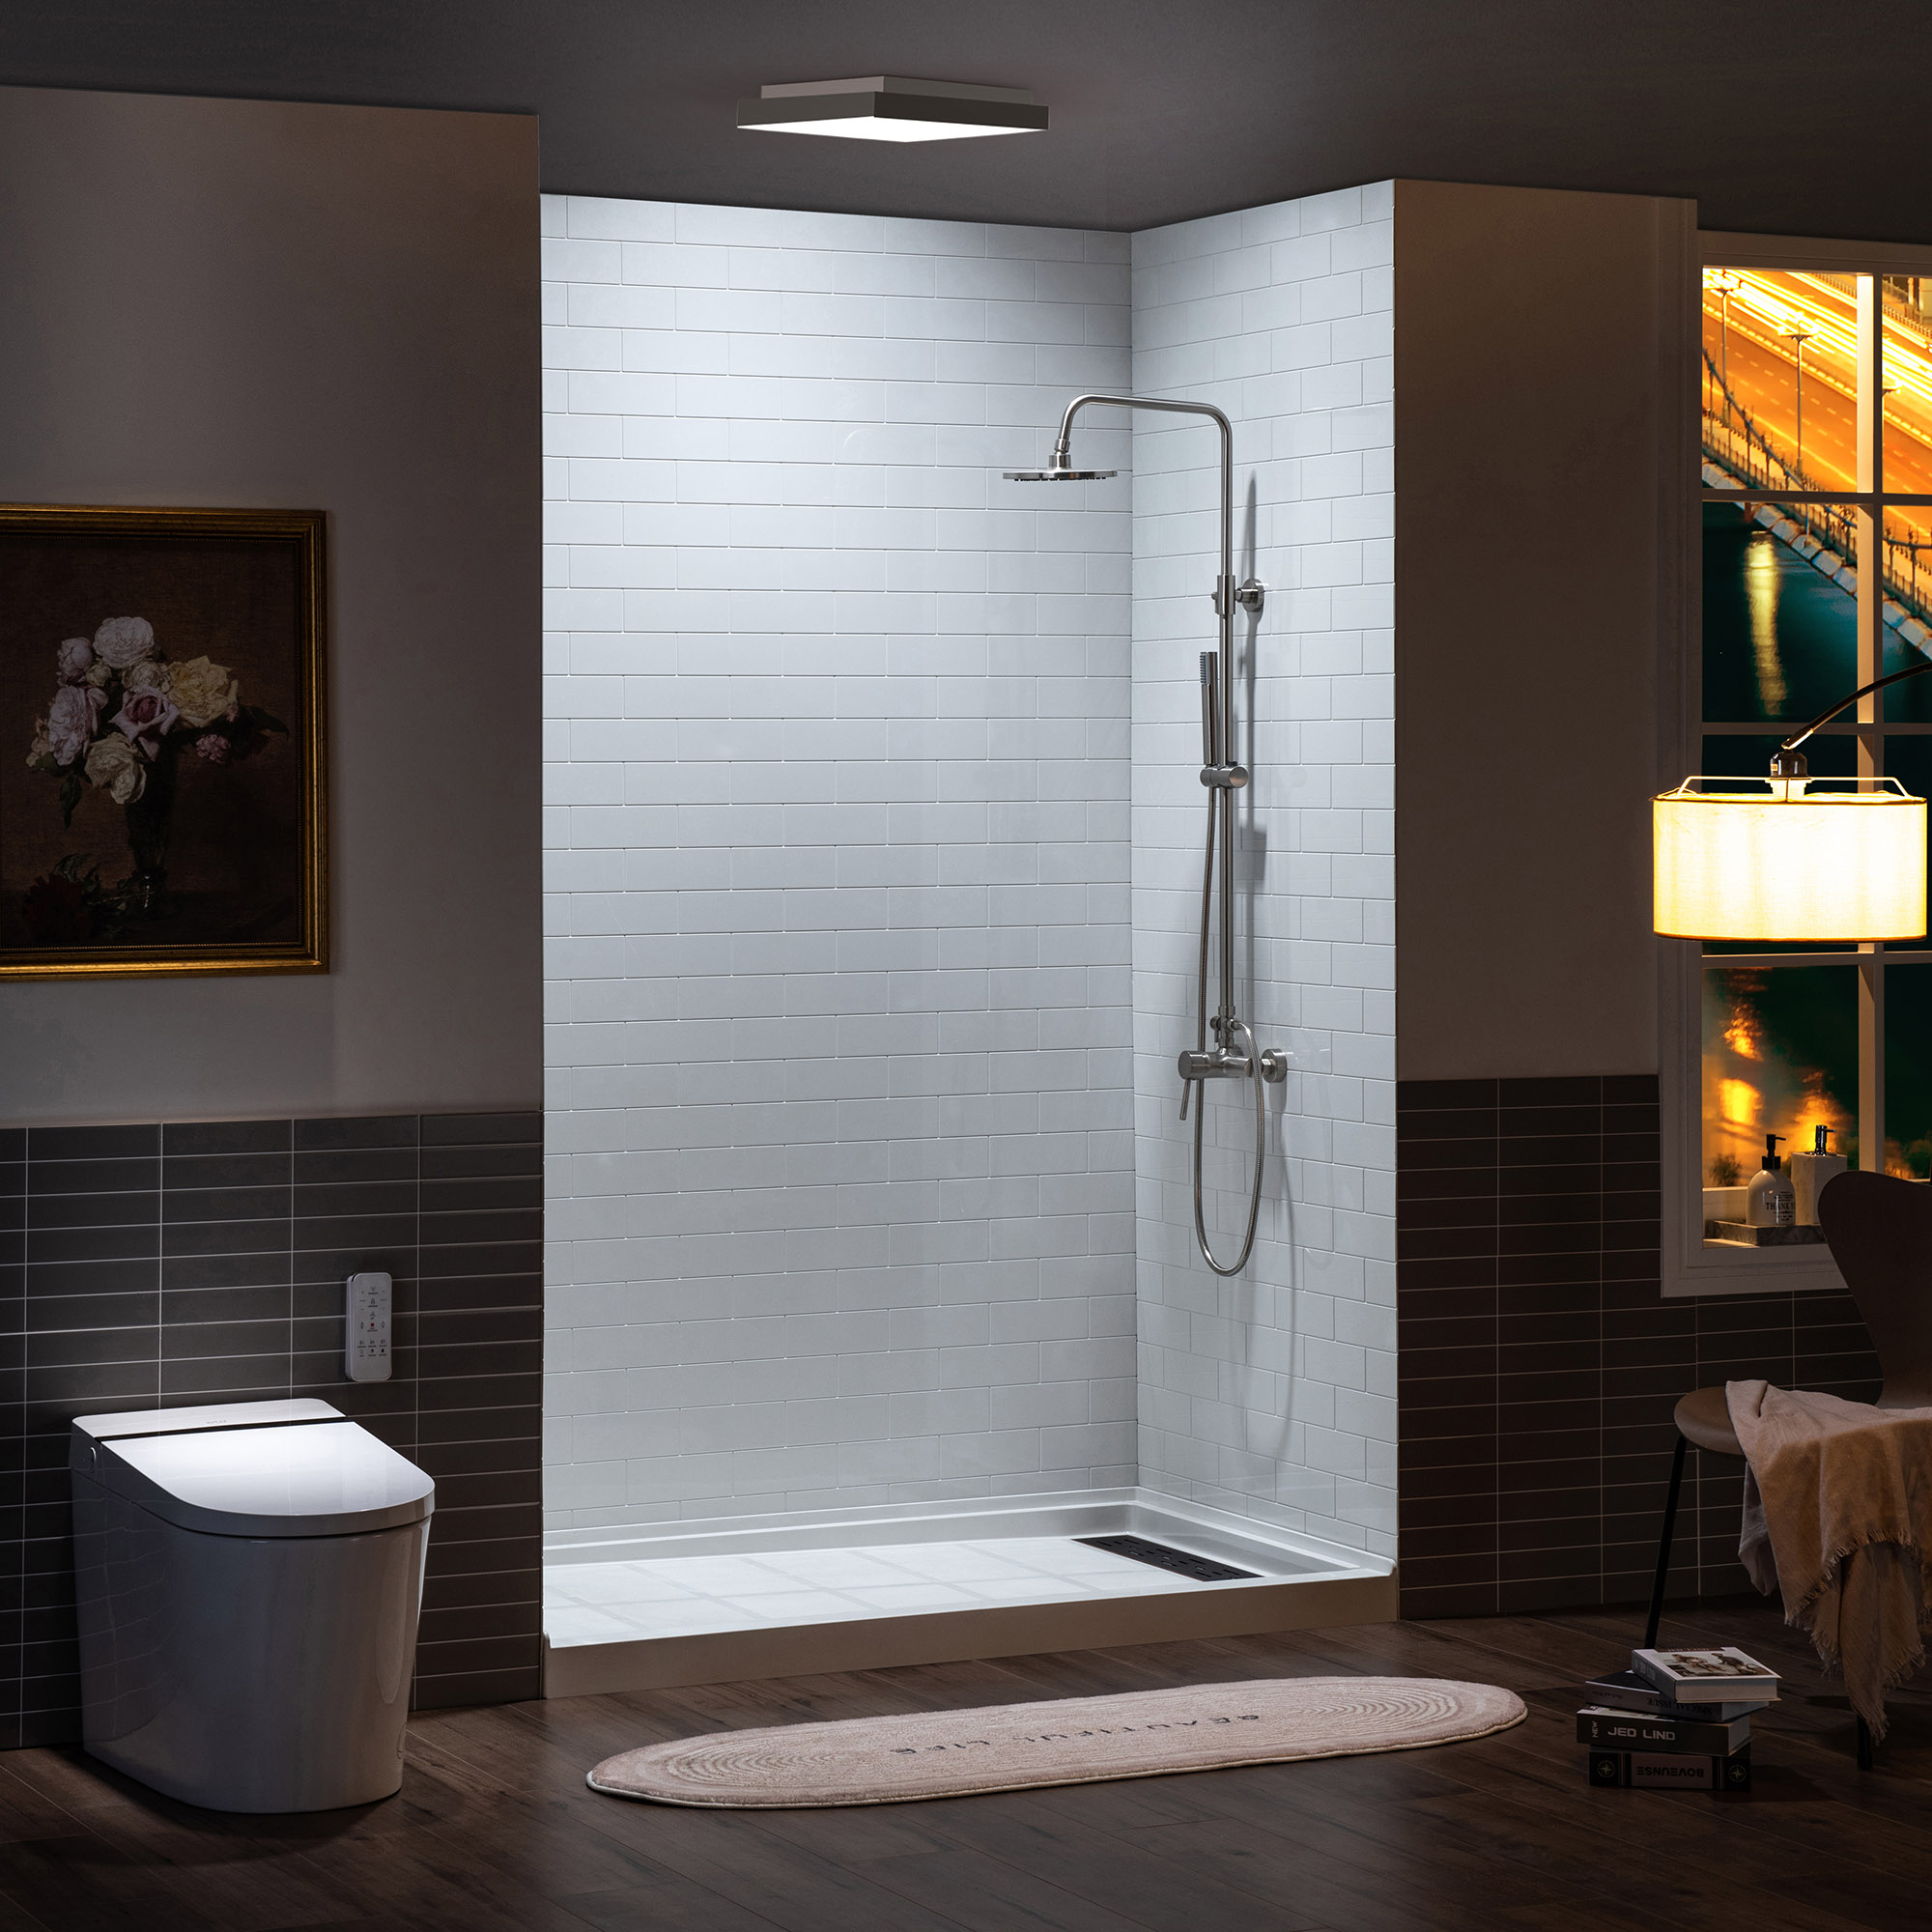  WOODBRIDGE  Solid Surface 3-Panel Shower Wall Kit, 32-in L x 60-in W x 75-in H, Staggered Brick Pattern, High Gloss White Finish_11720